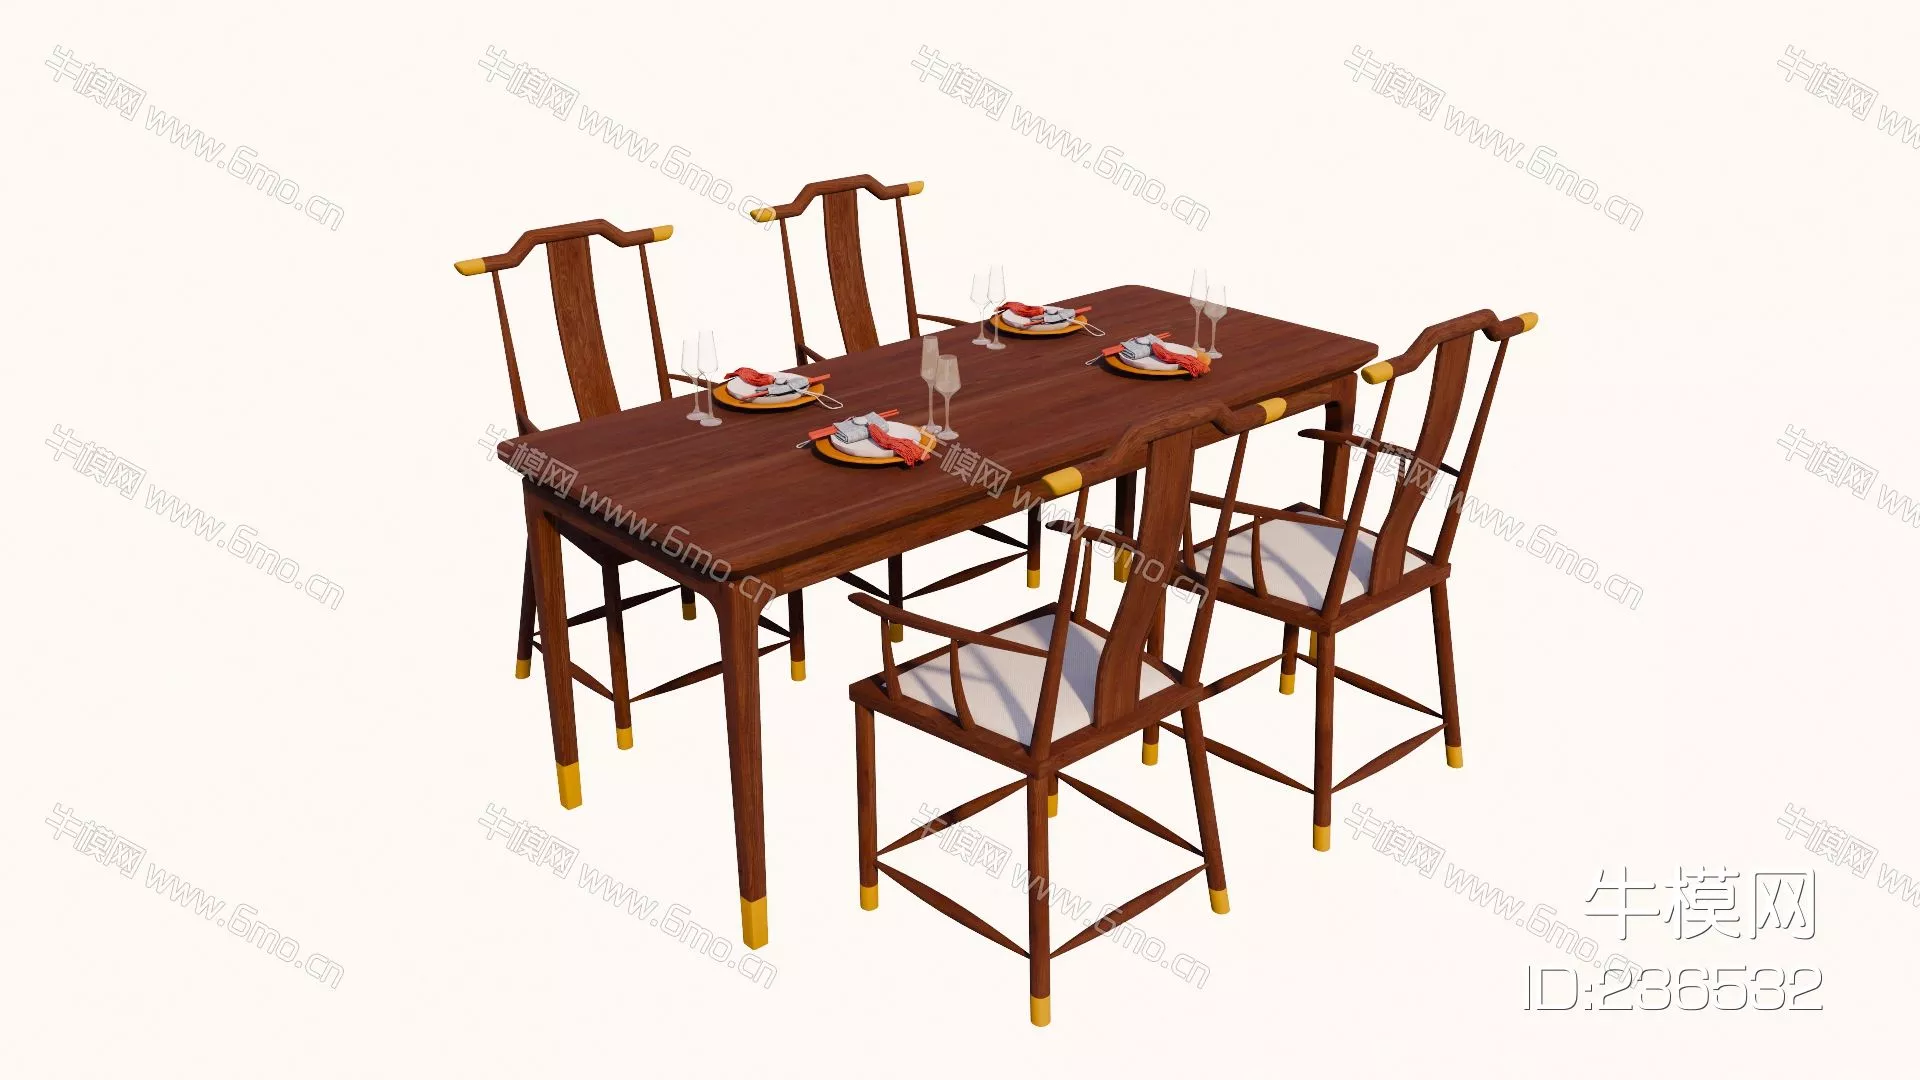 CHINESE DINING TABLE SET - SKETCHUP 3D MODEL - ENSCAPE - 236532